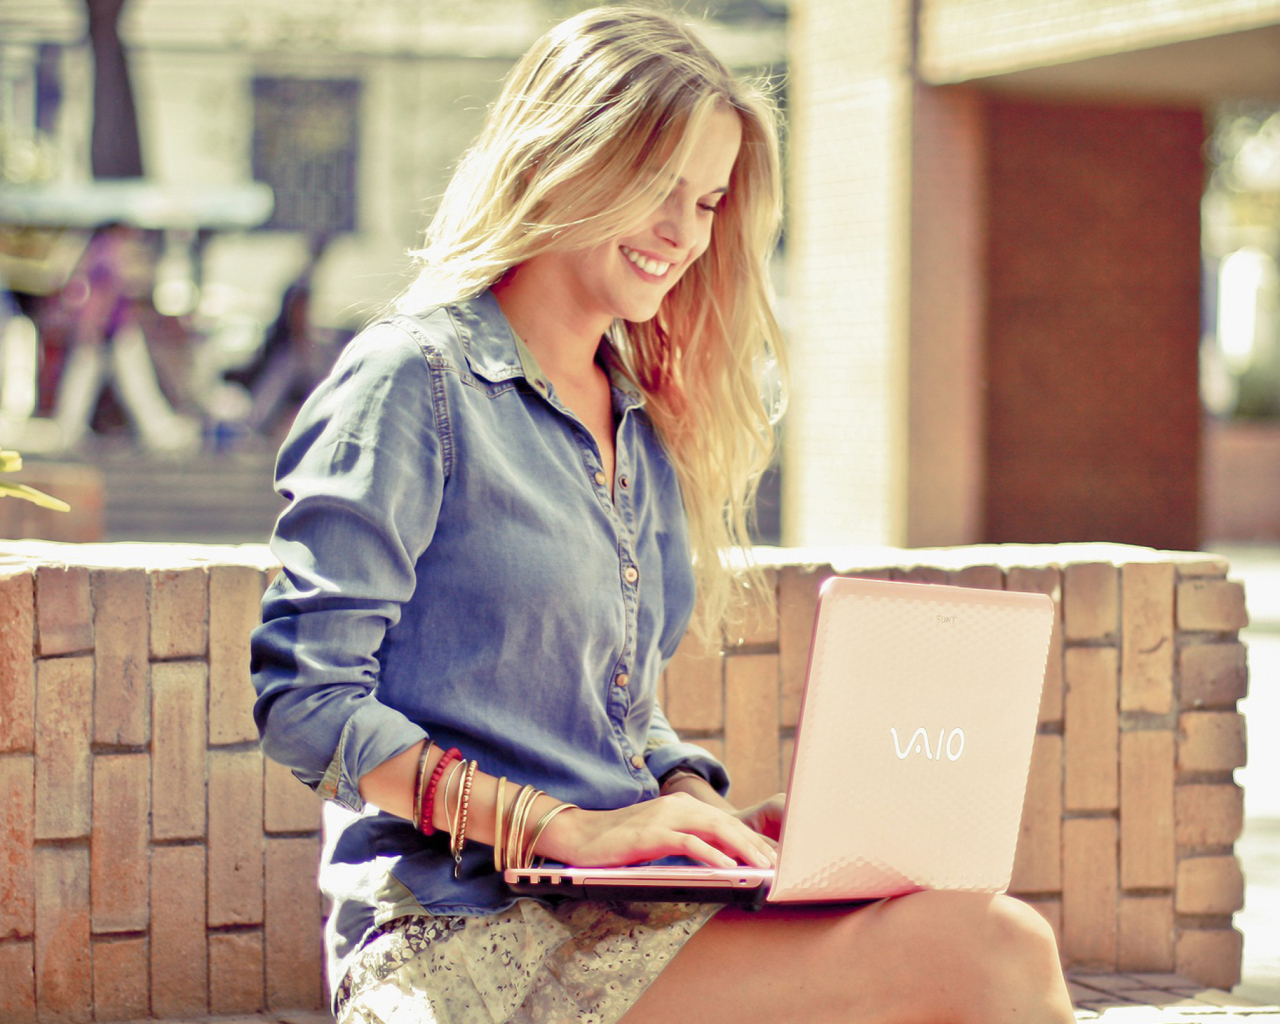 Girl With Laptop wallpaper 1280x1024